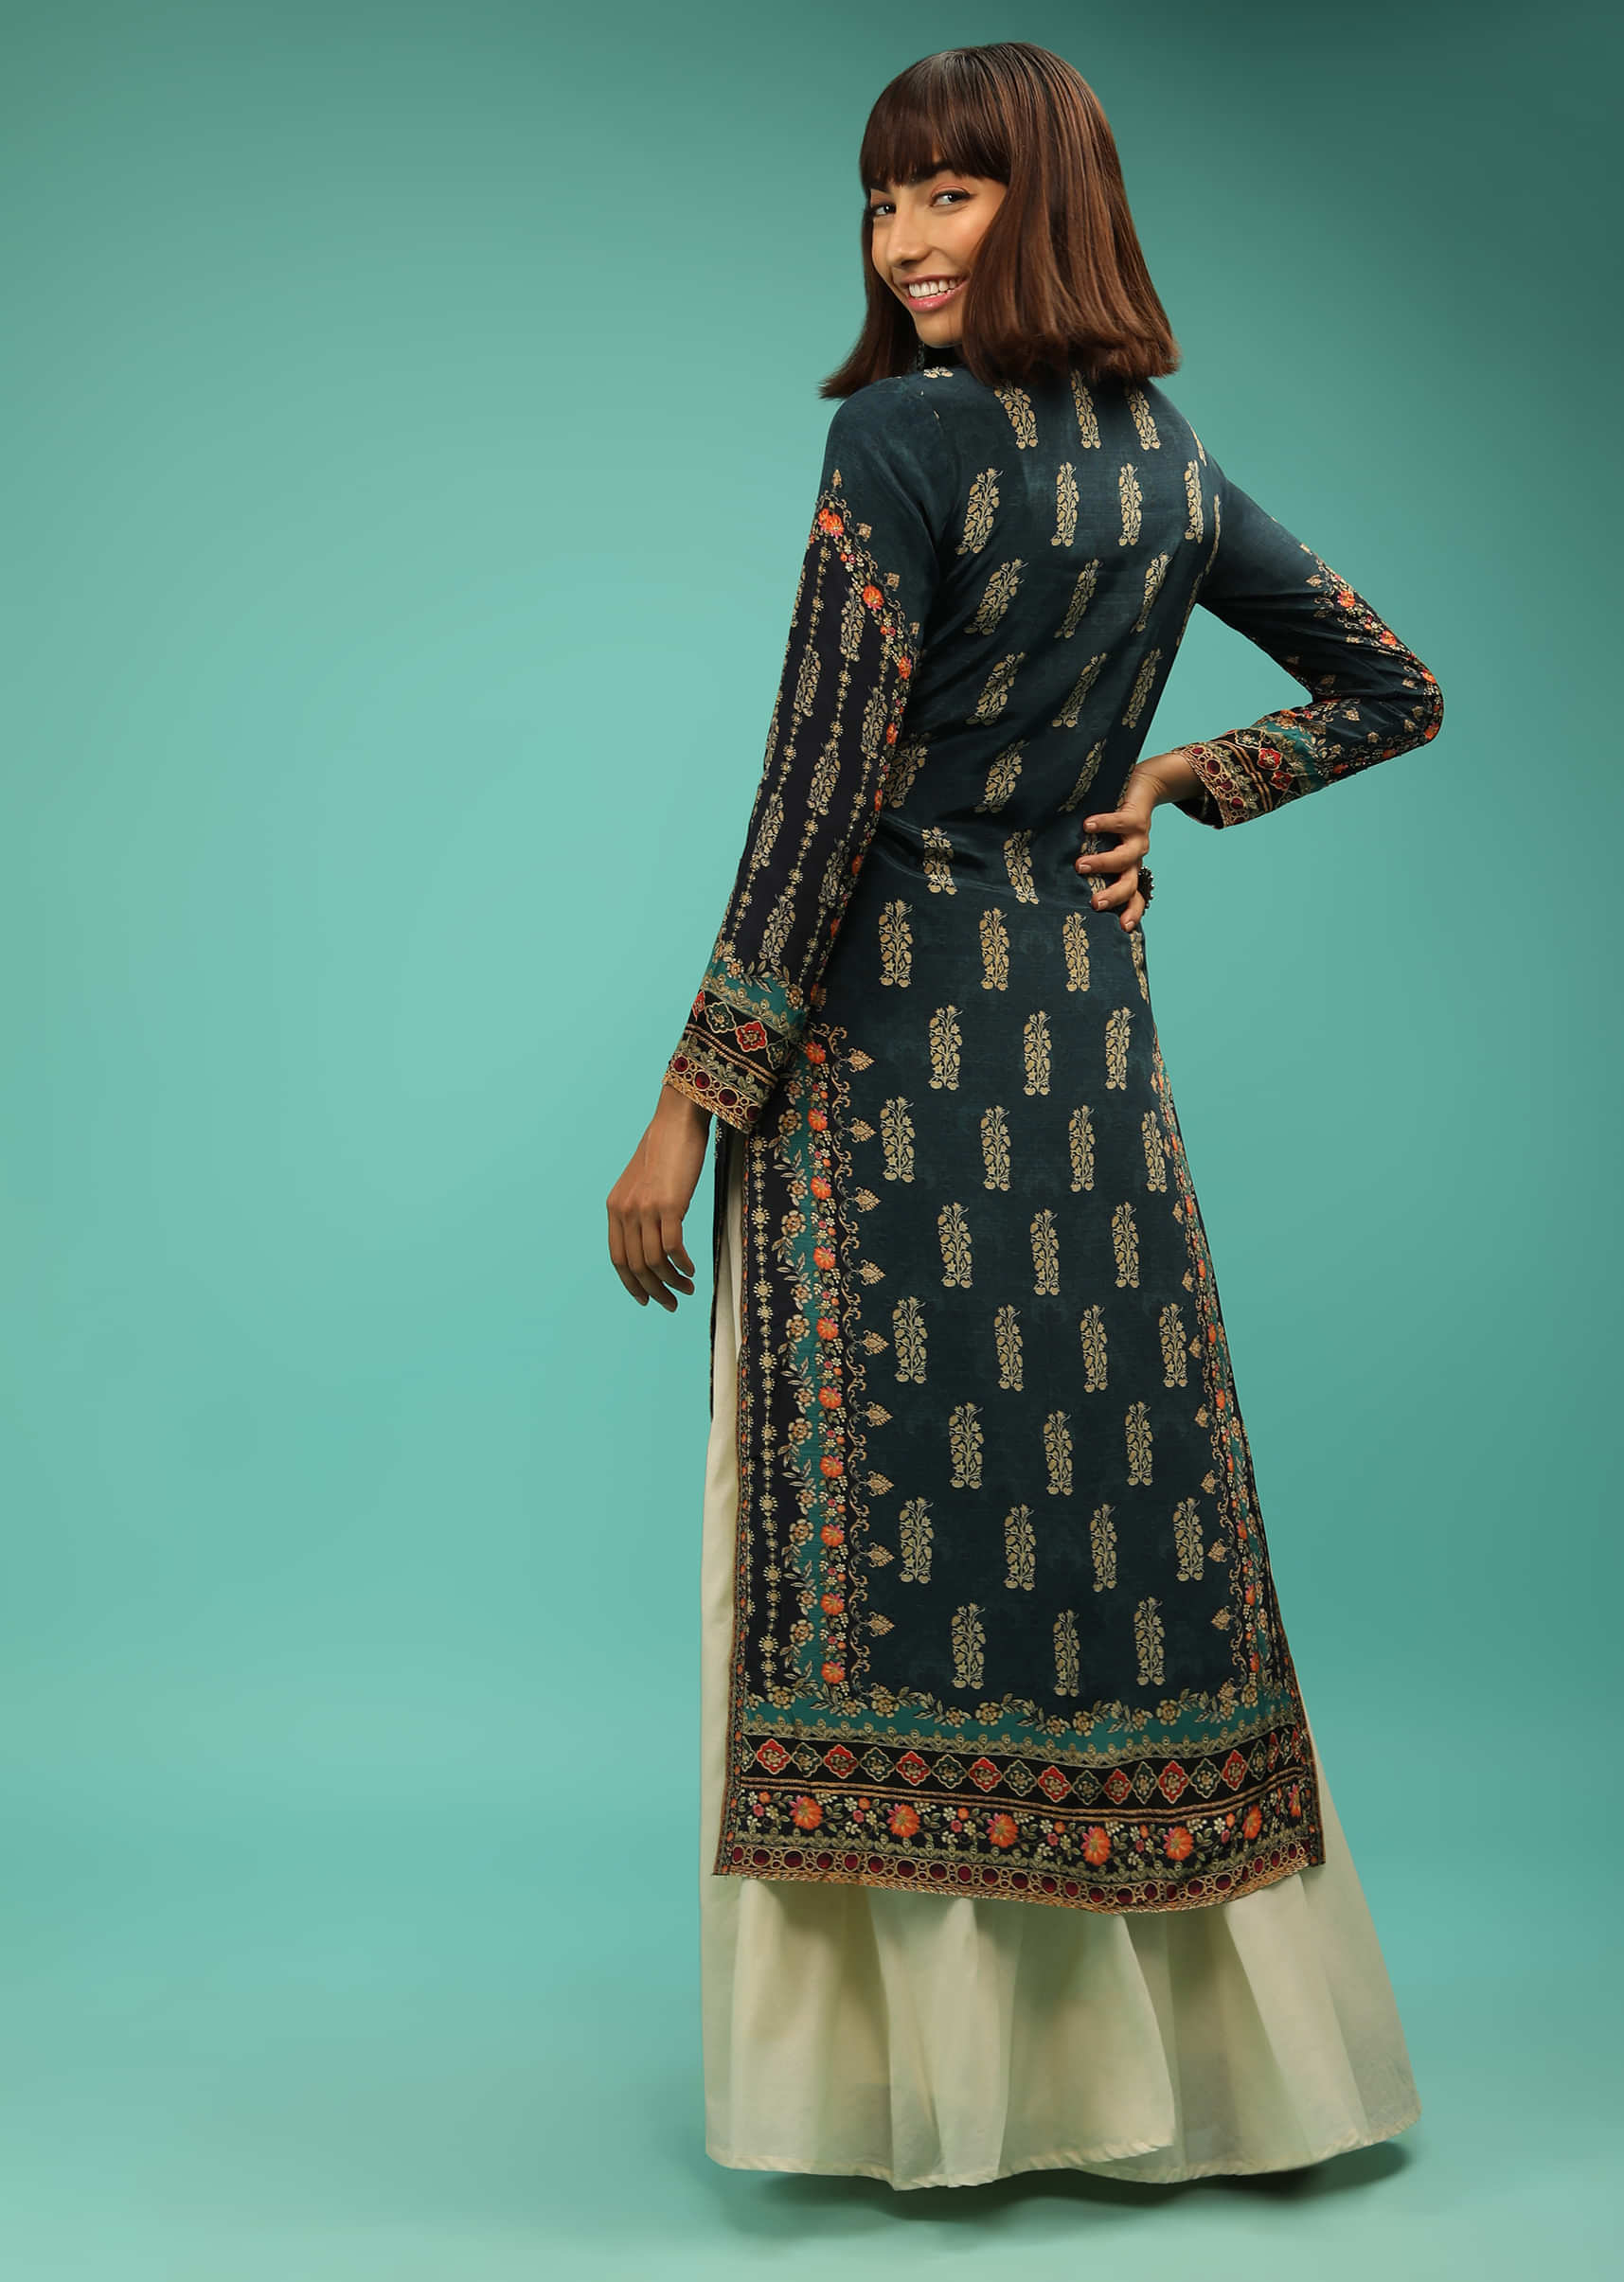 Midnight Blue Straight Cut Kurti In Crepe With Floral Printed Bodice And Floral Buttis 